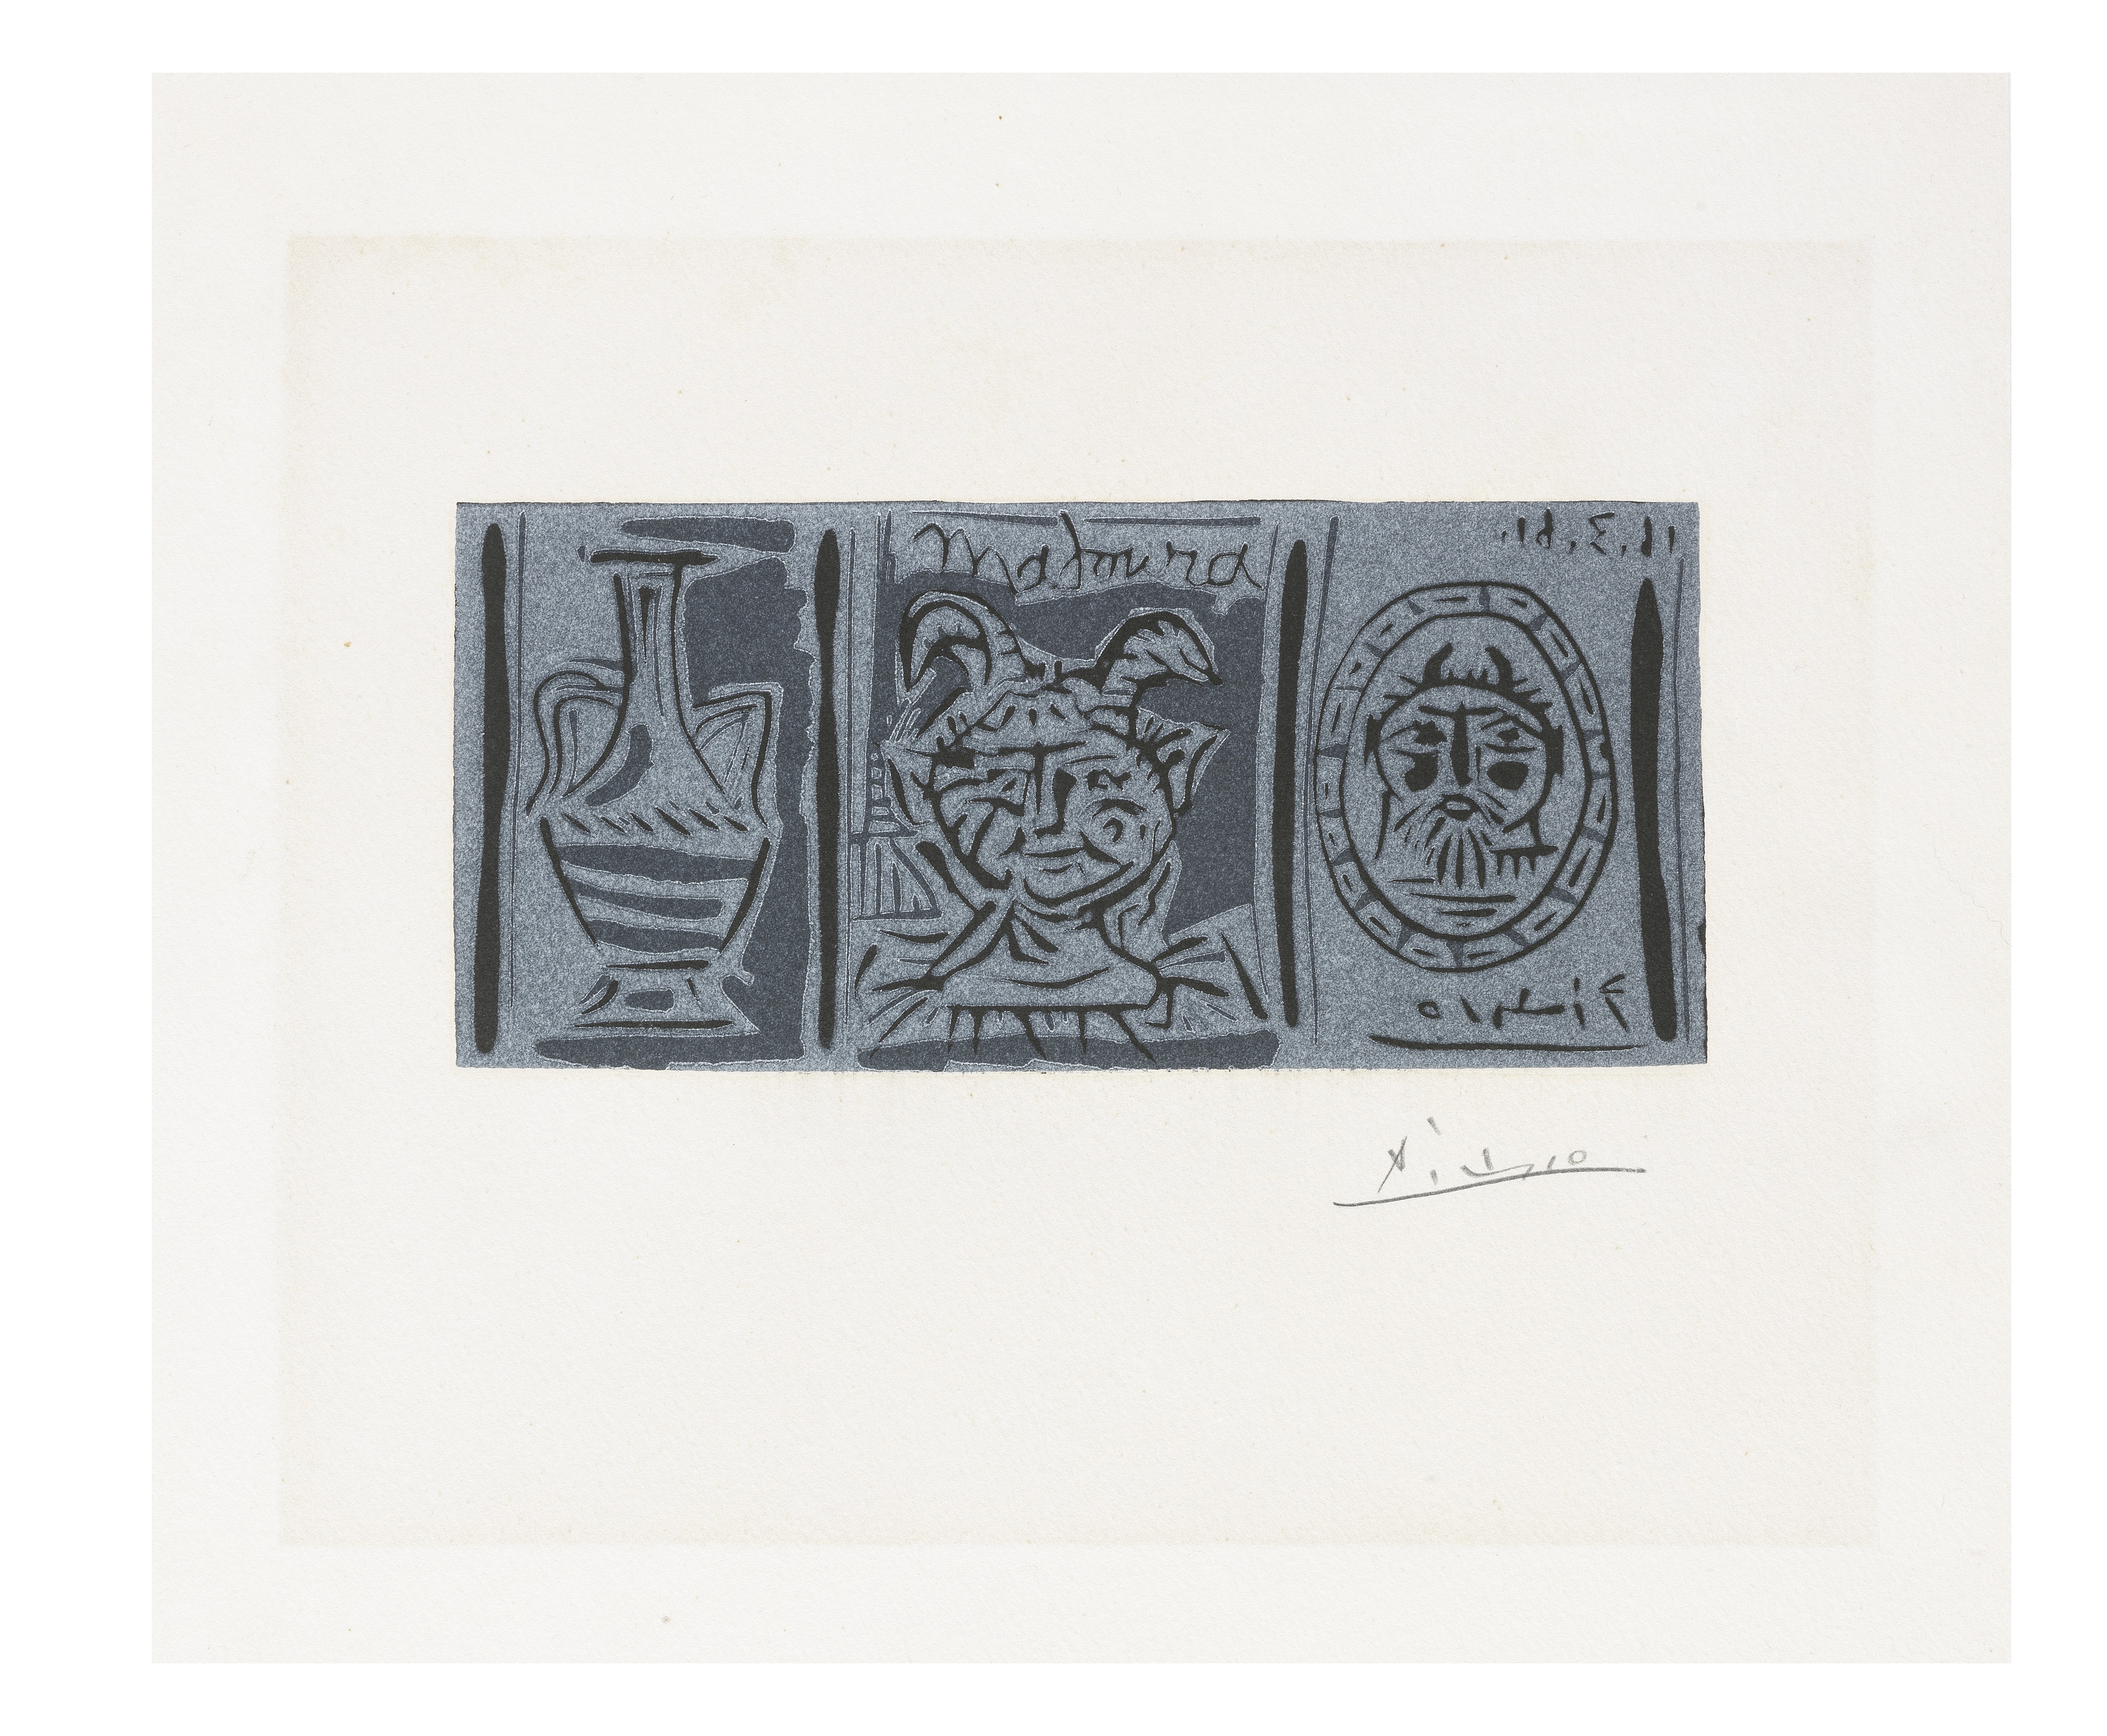 PABLO PICASSO (1881-1973) Madoura, 1961 (This work is one of 71 hors-commerce impressions aside f...